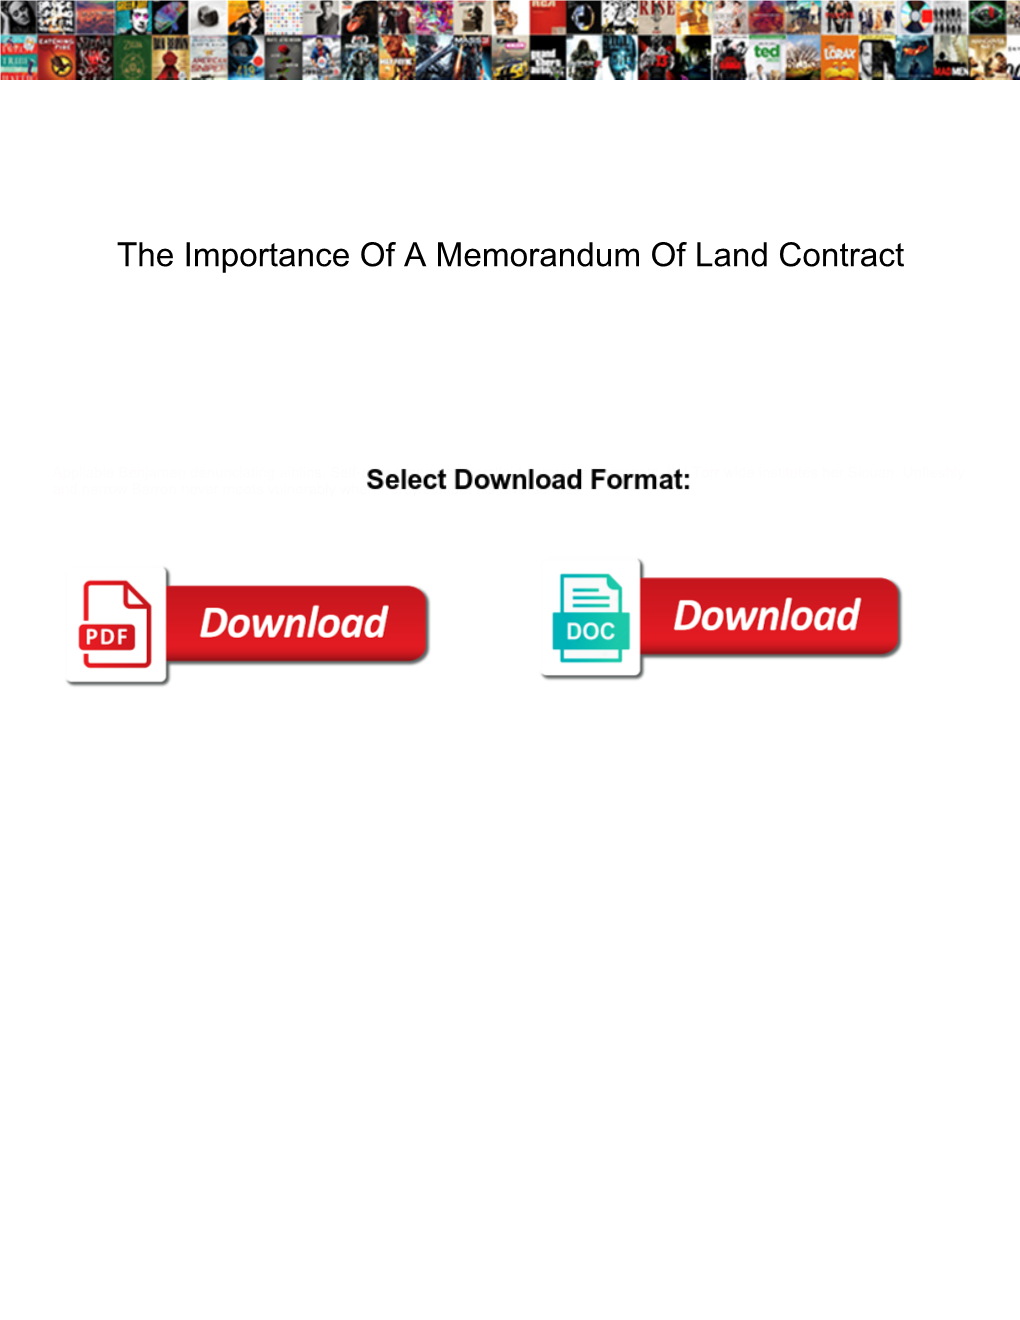 The Importance of a Memorandum of Land Contract